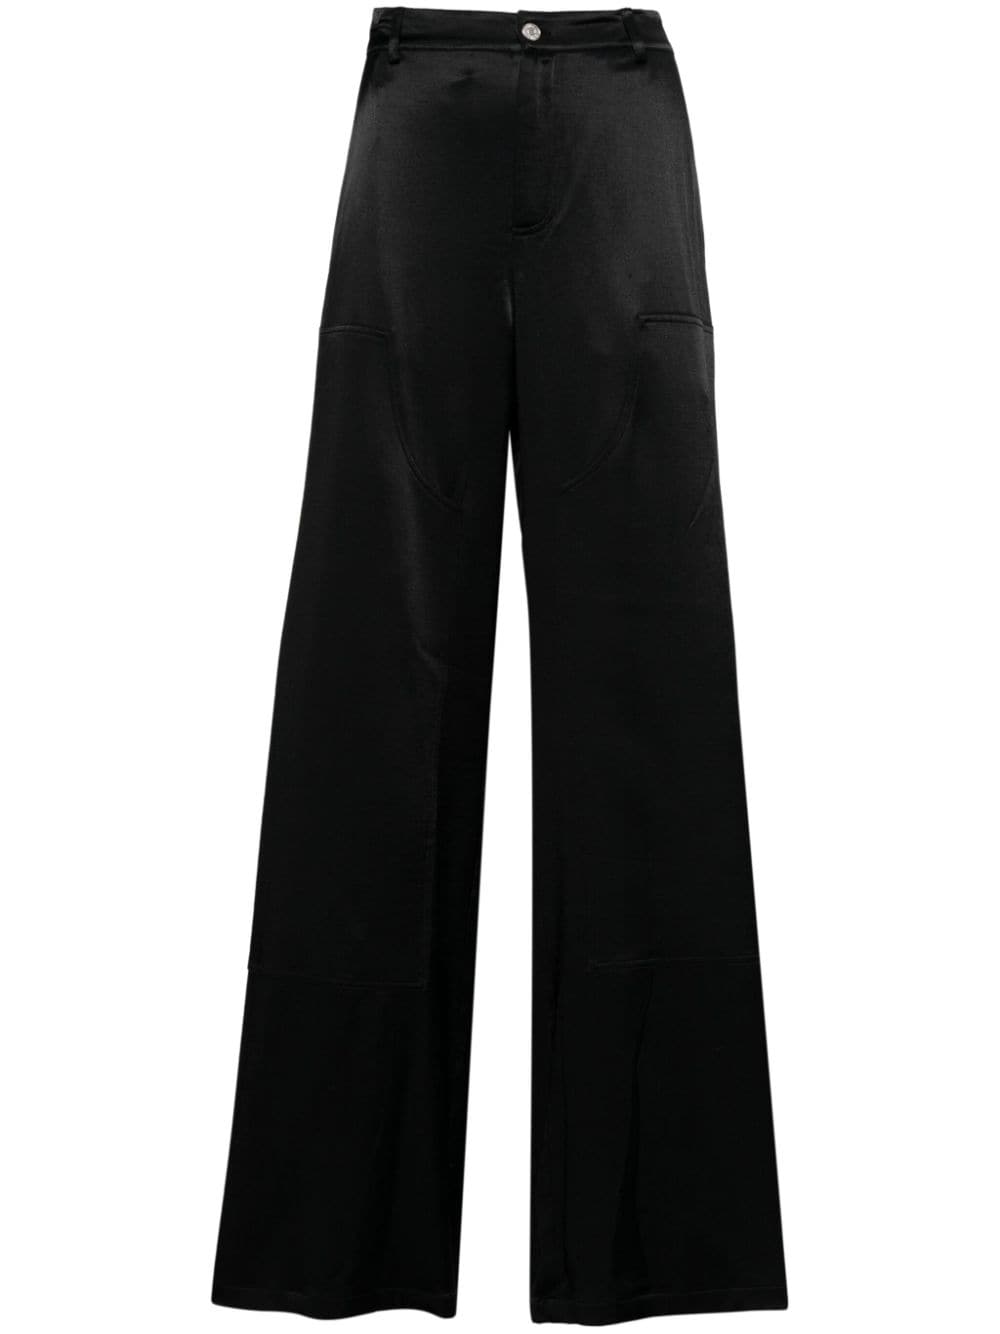 MOSCHINO JEANS satin-finish wide-leg trousers - Black von MOSCHINO JEANS